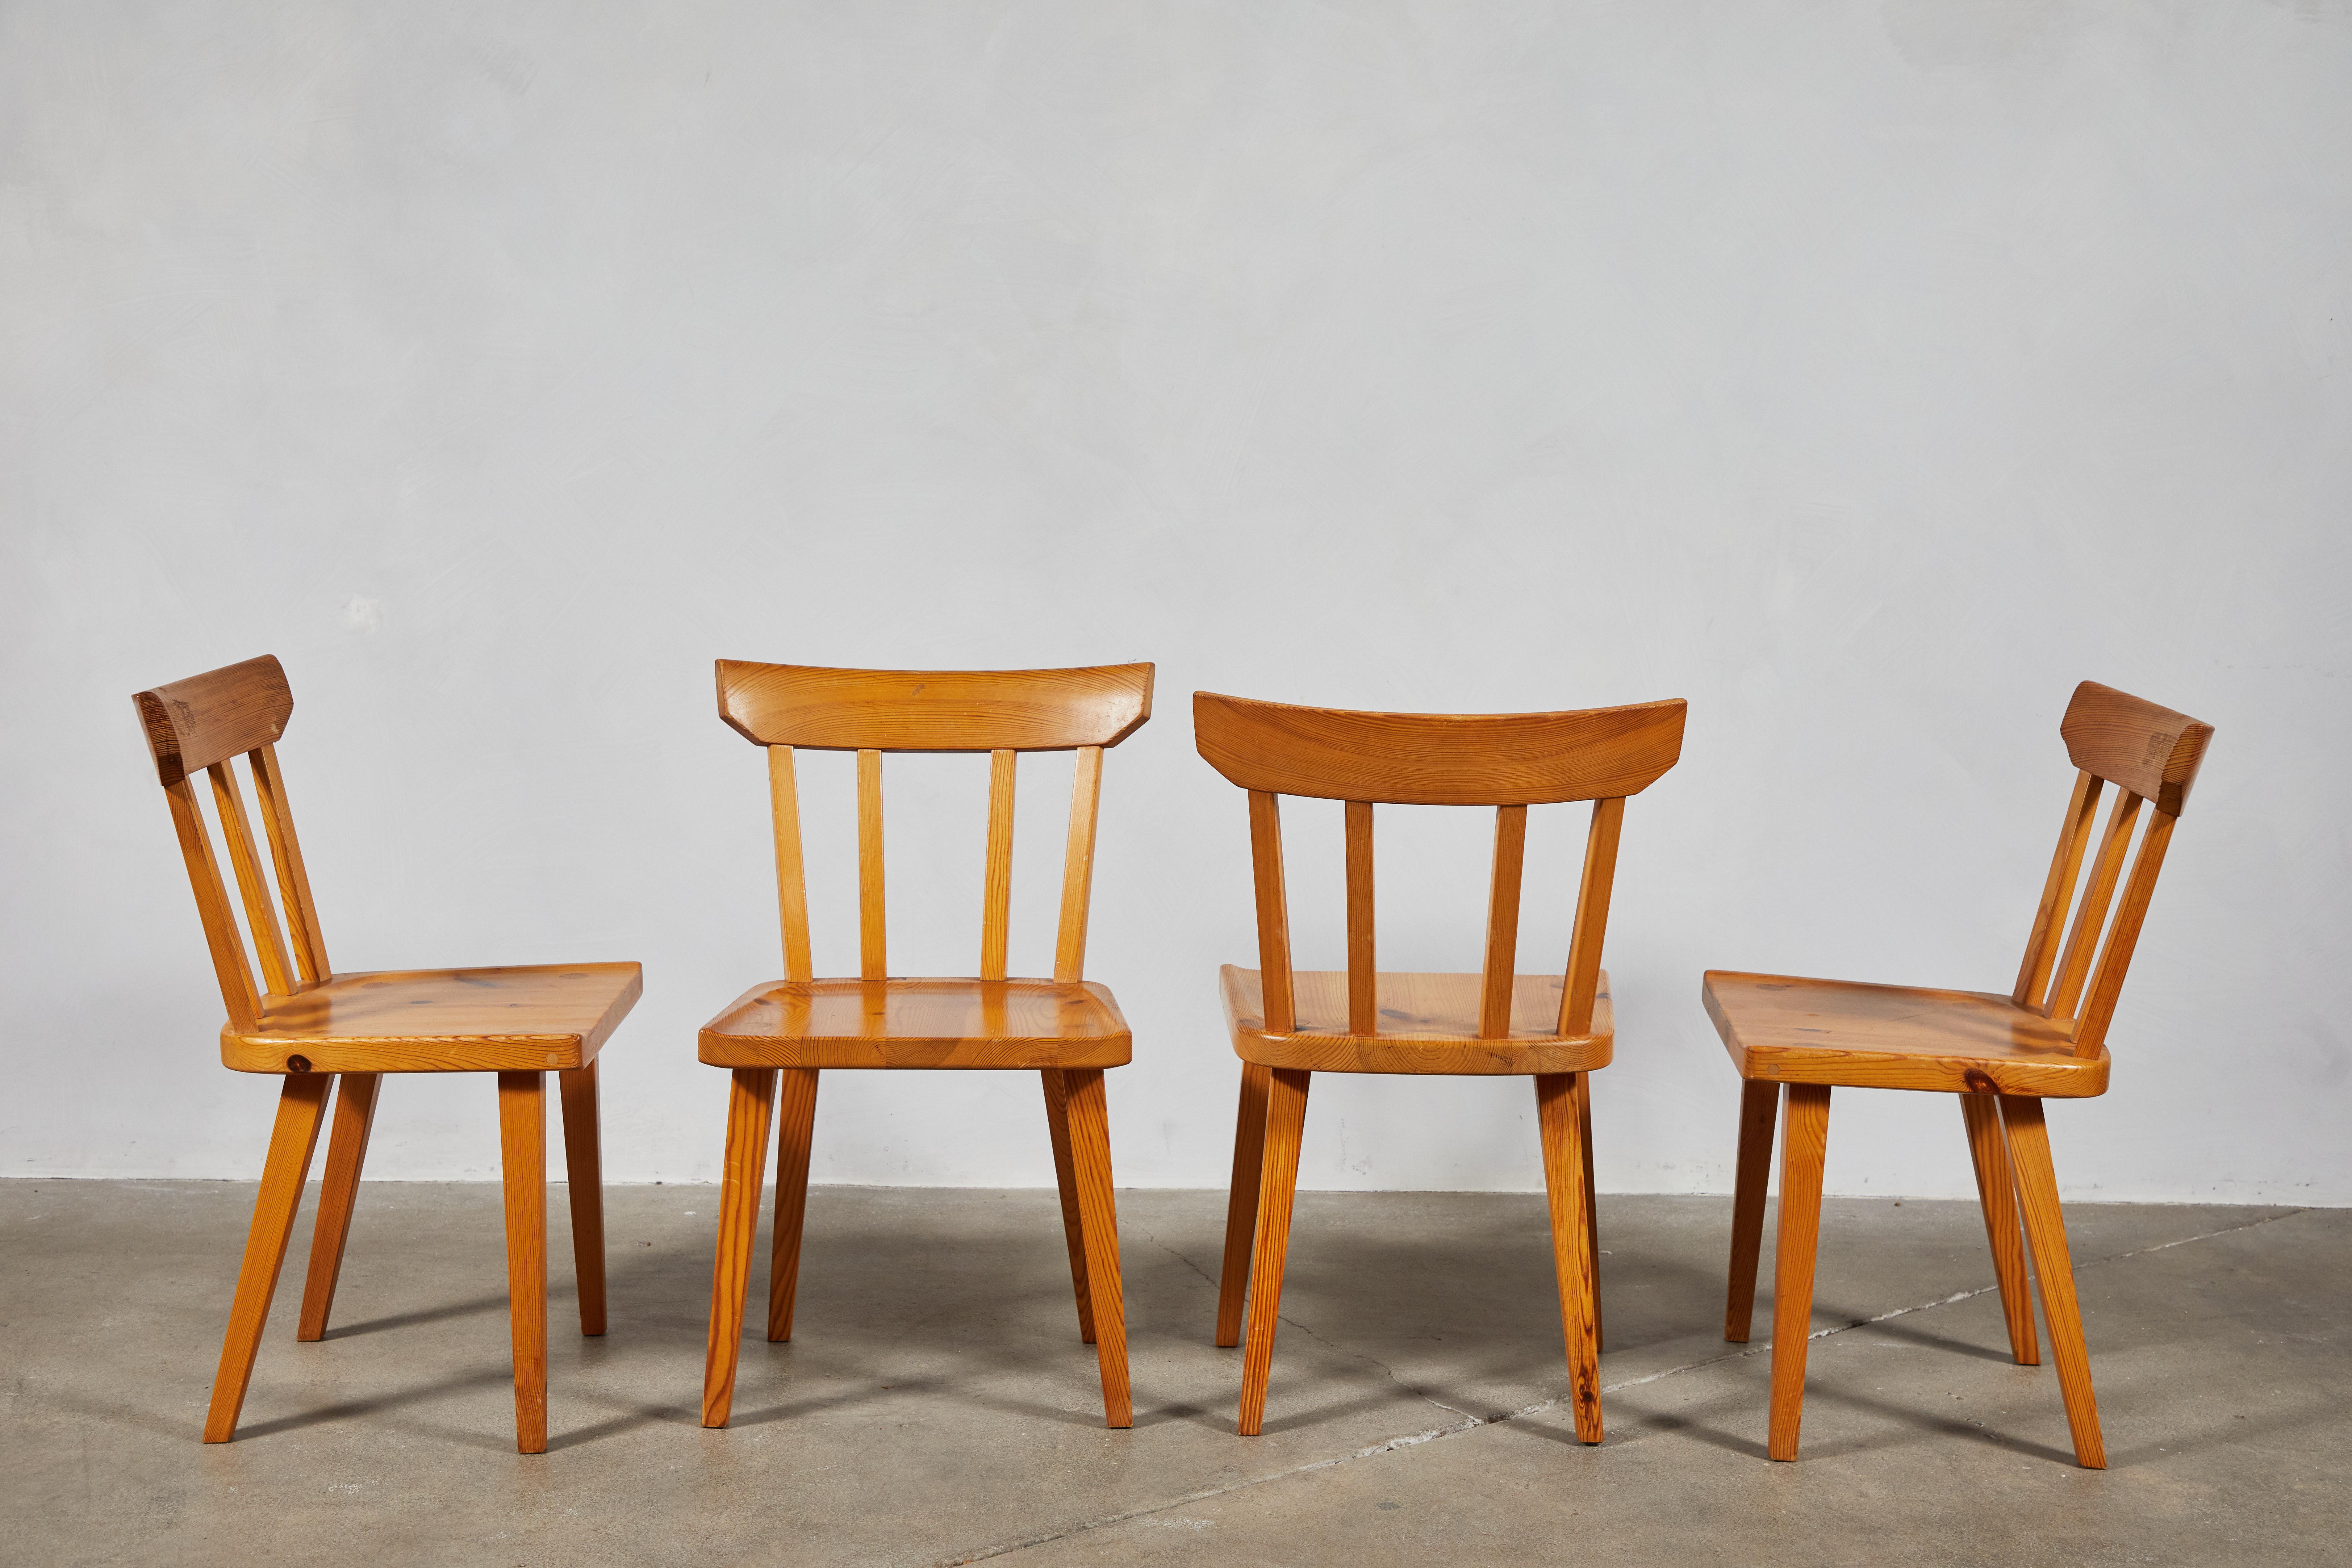 Mid-Century set of four pine dining chairs with spindle backs. The chairs offer simple construction and clean lines.